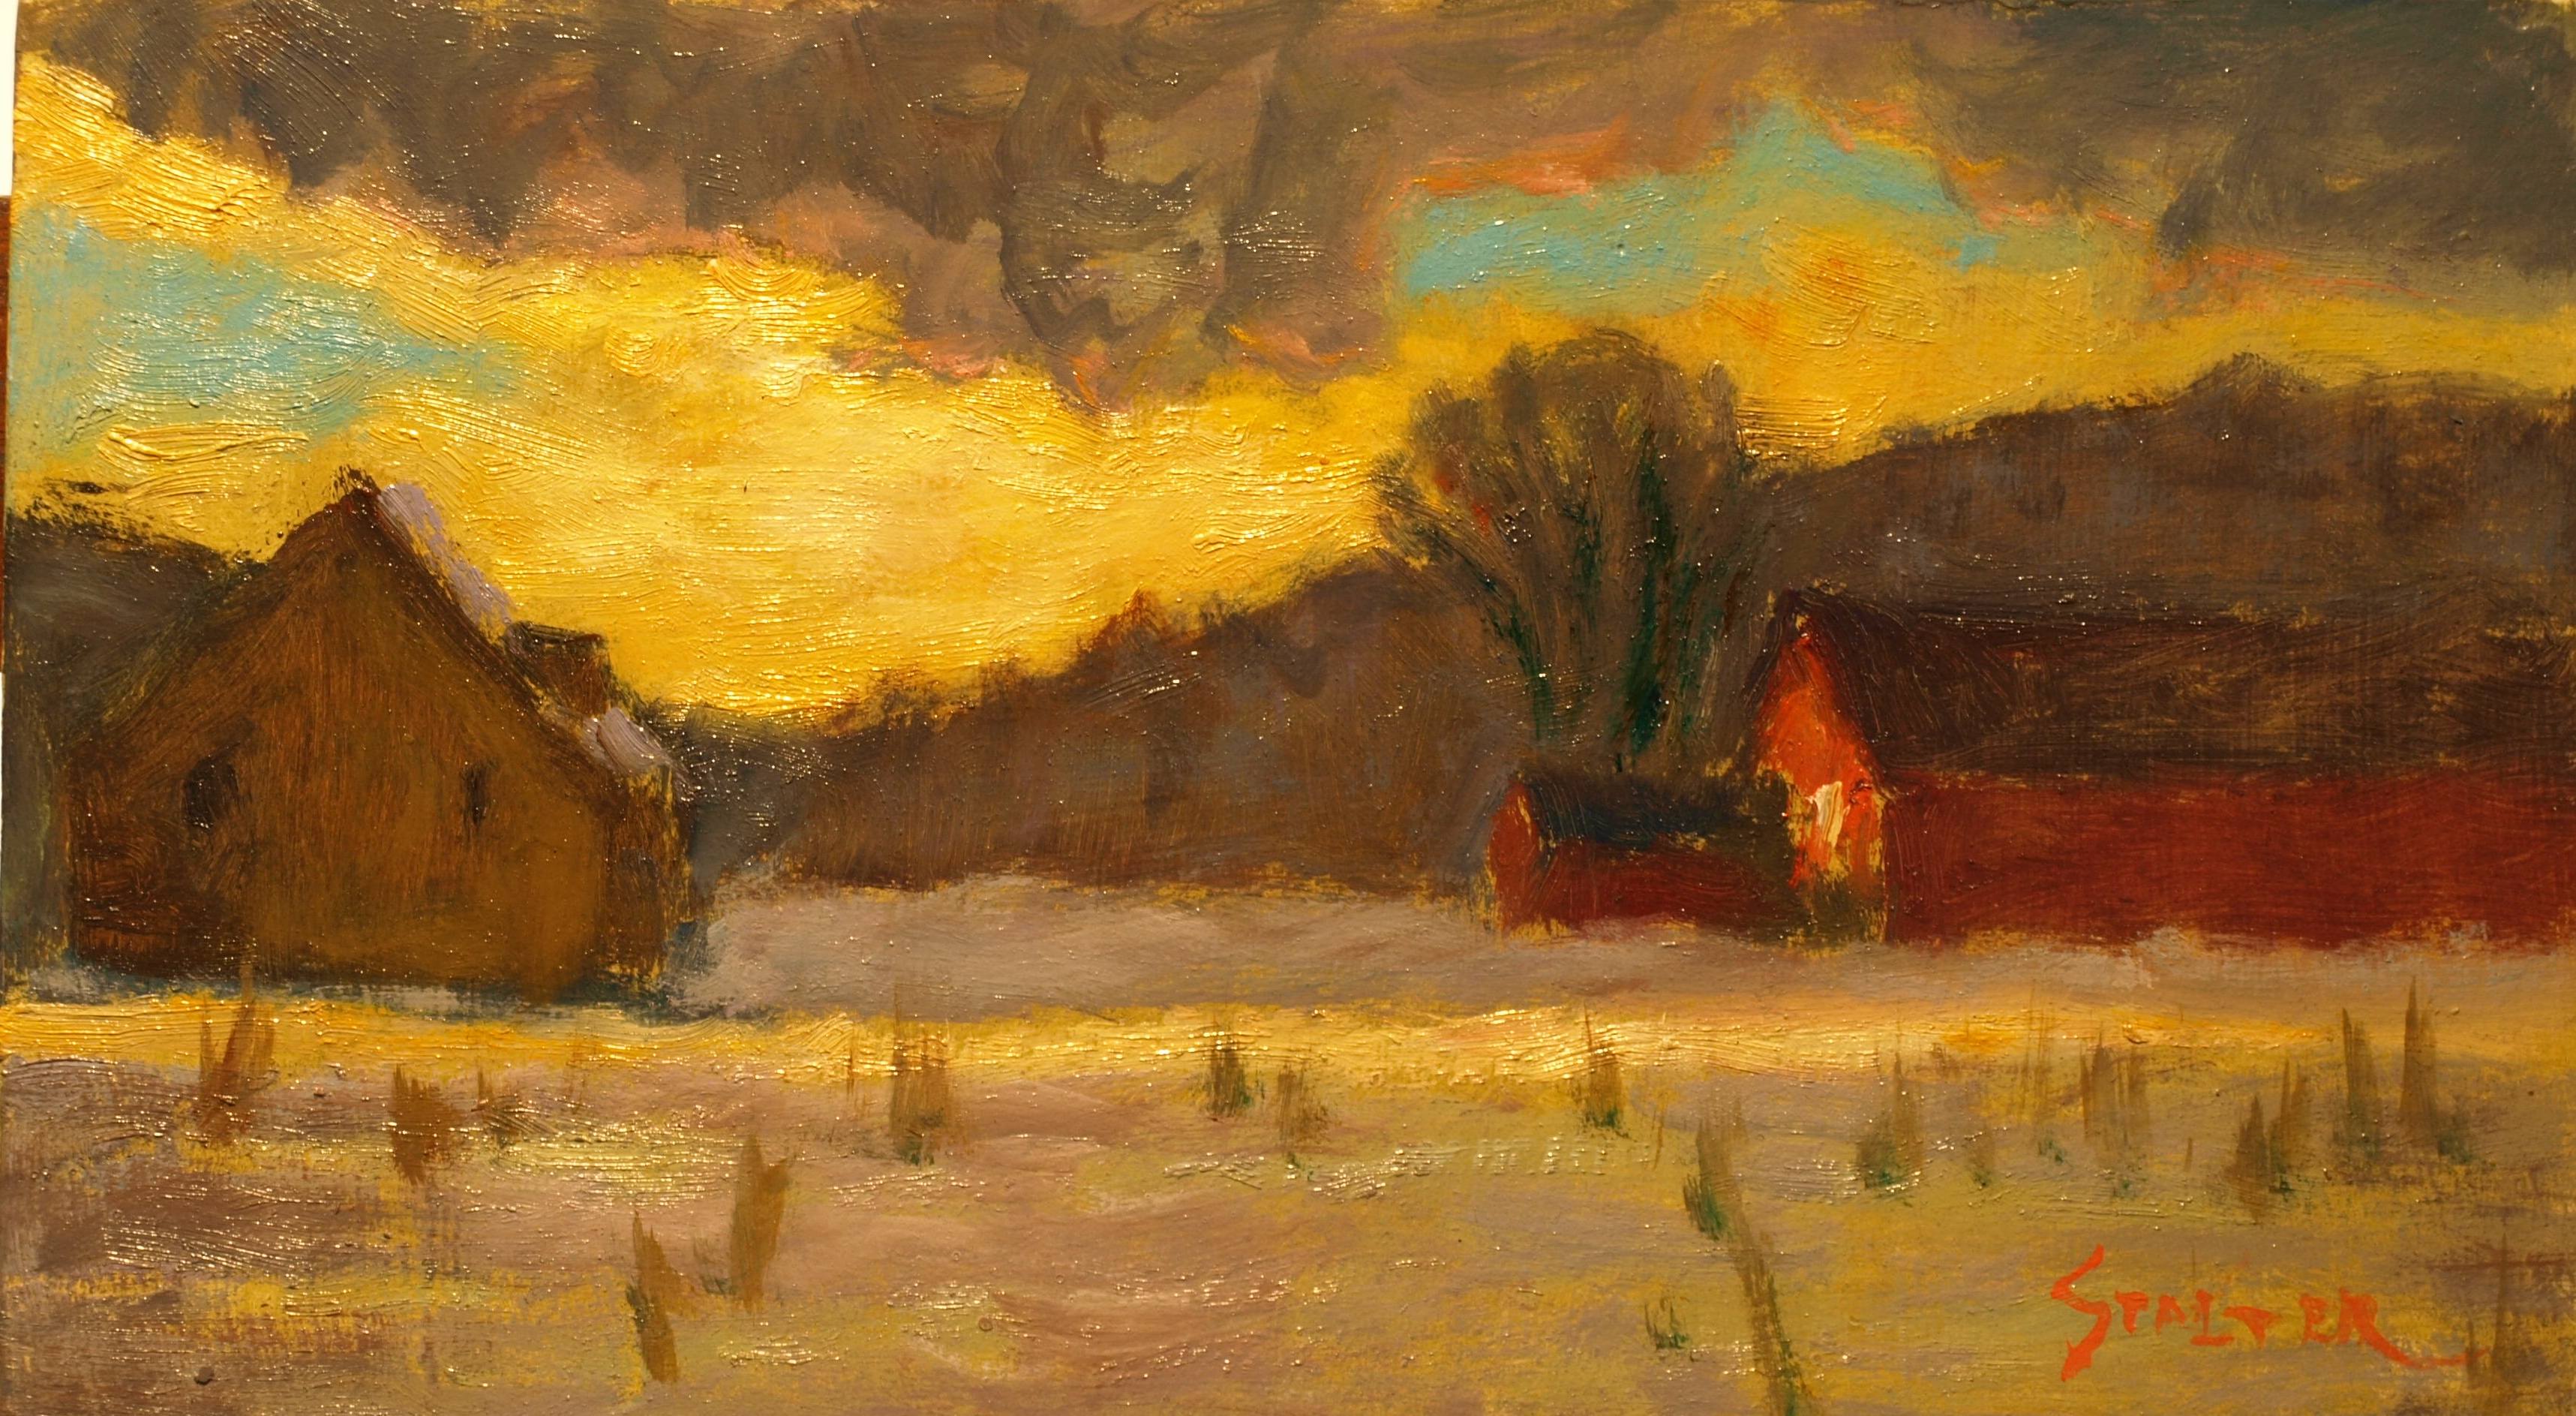 Dispersing Storm Clouds, Oil on Canvas on Panel, 8 x 14 Inches, by Richard Stalter, $225